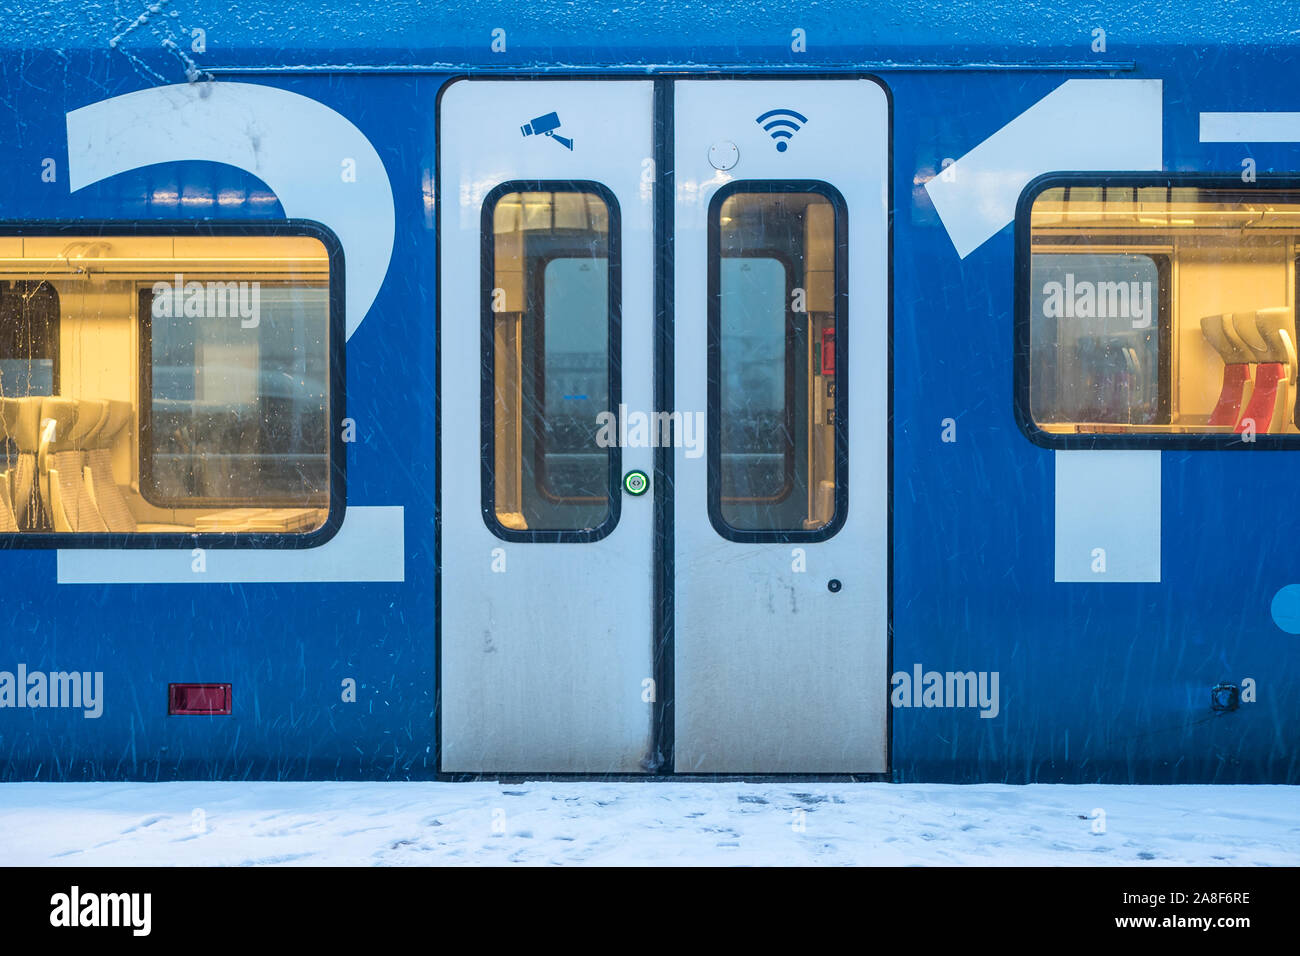 A blue and white Keolis train is weiting for departure. The doors are closed and the interior lights are on. Stock Photo